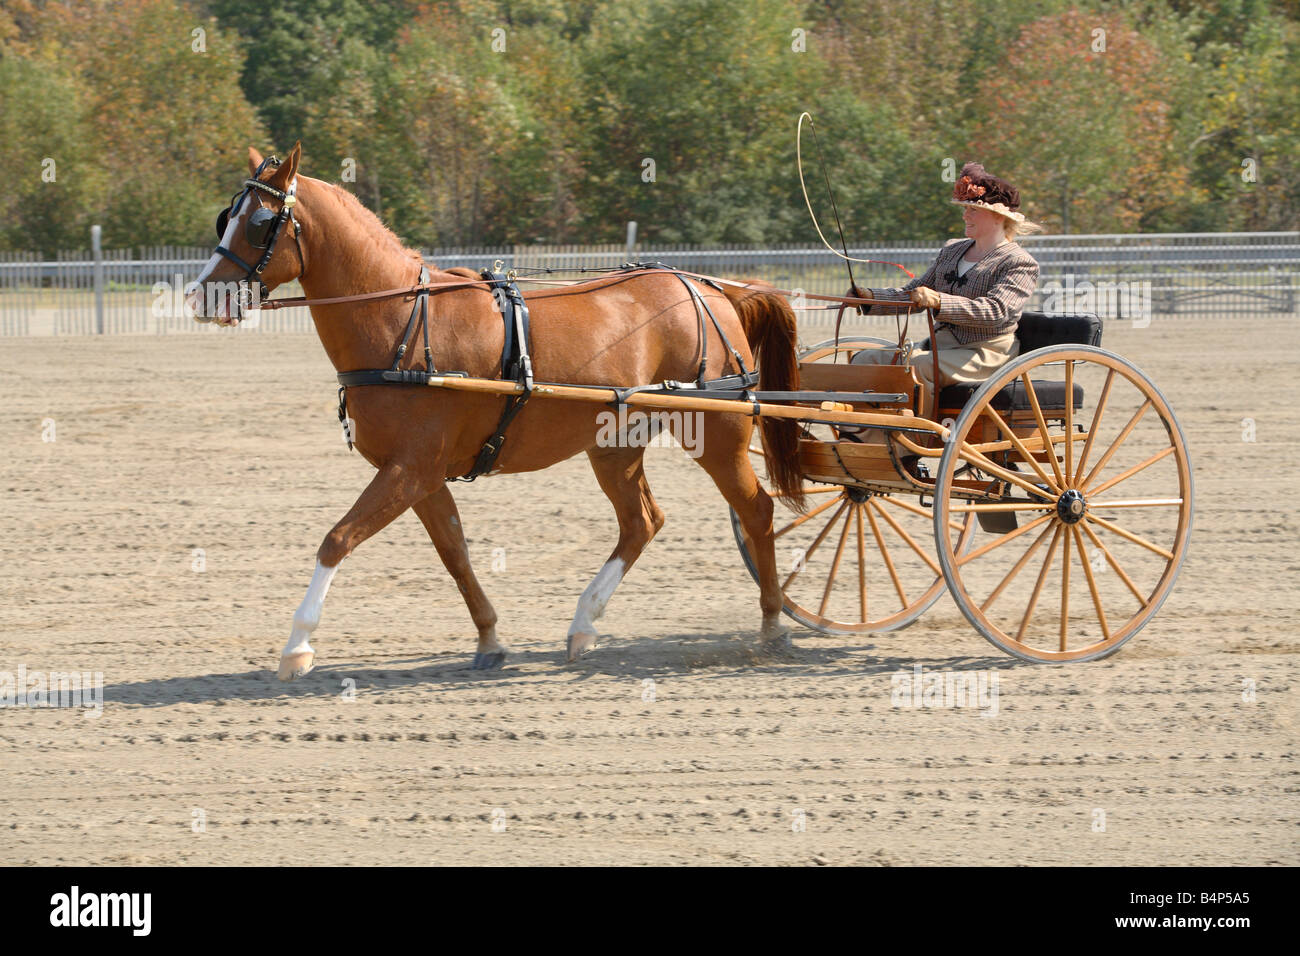 Draft horse and carriage trotting in the ring at the Sussex County Fairgrounds, Augusta, NJ Stock Photo